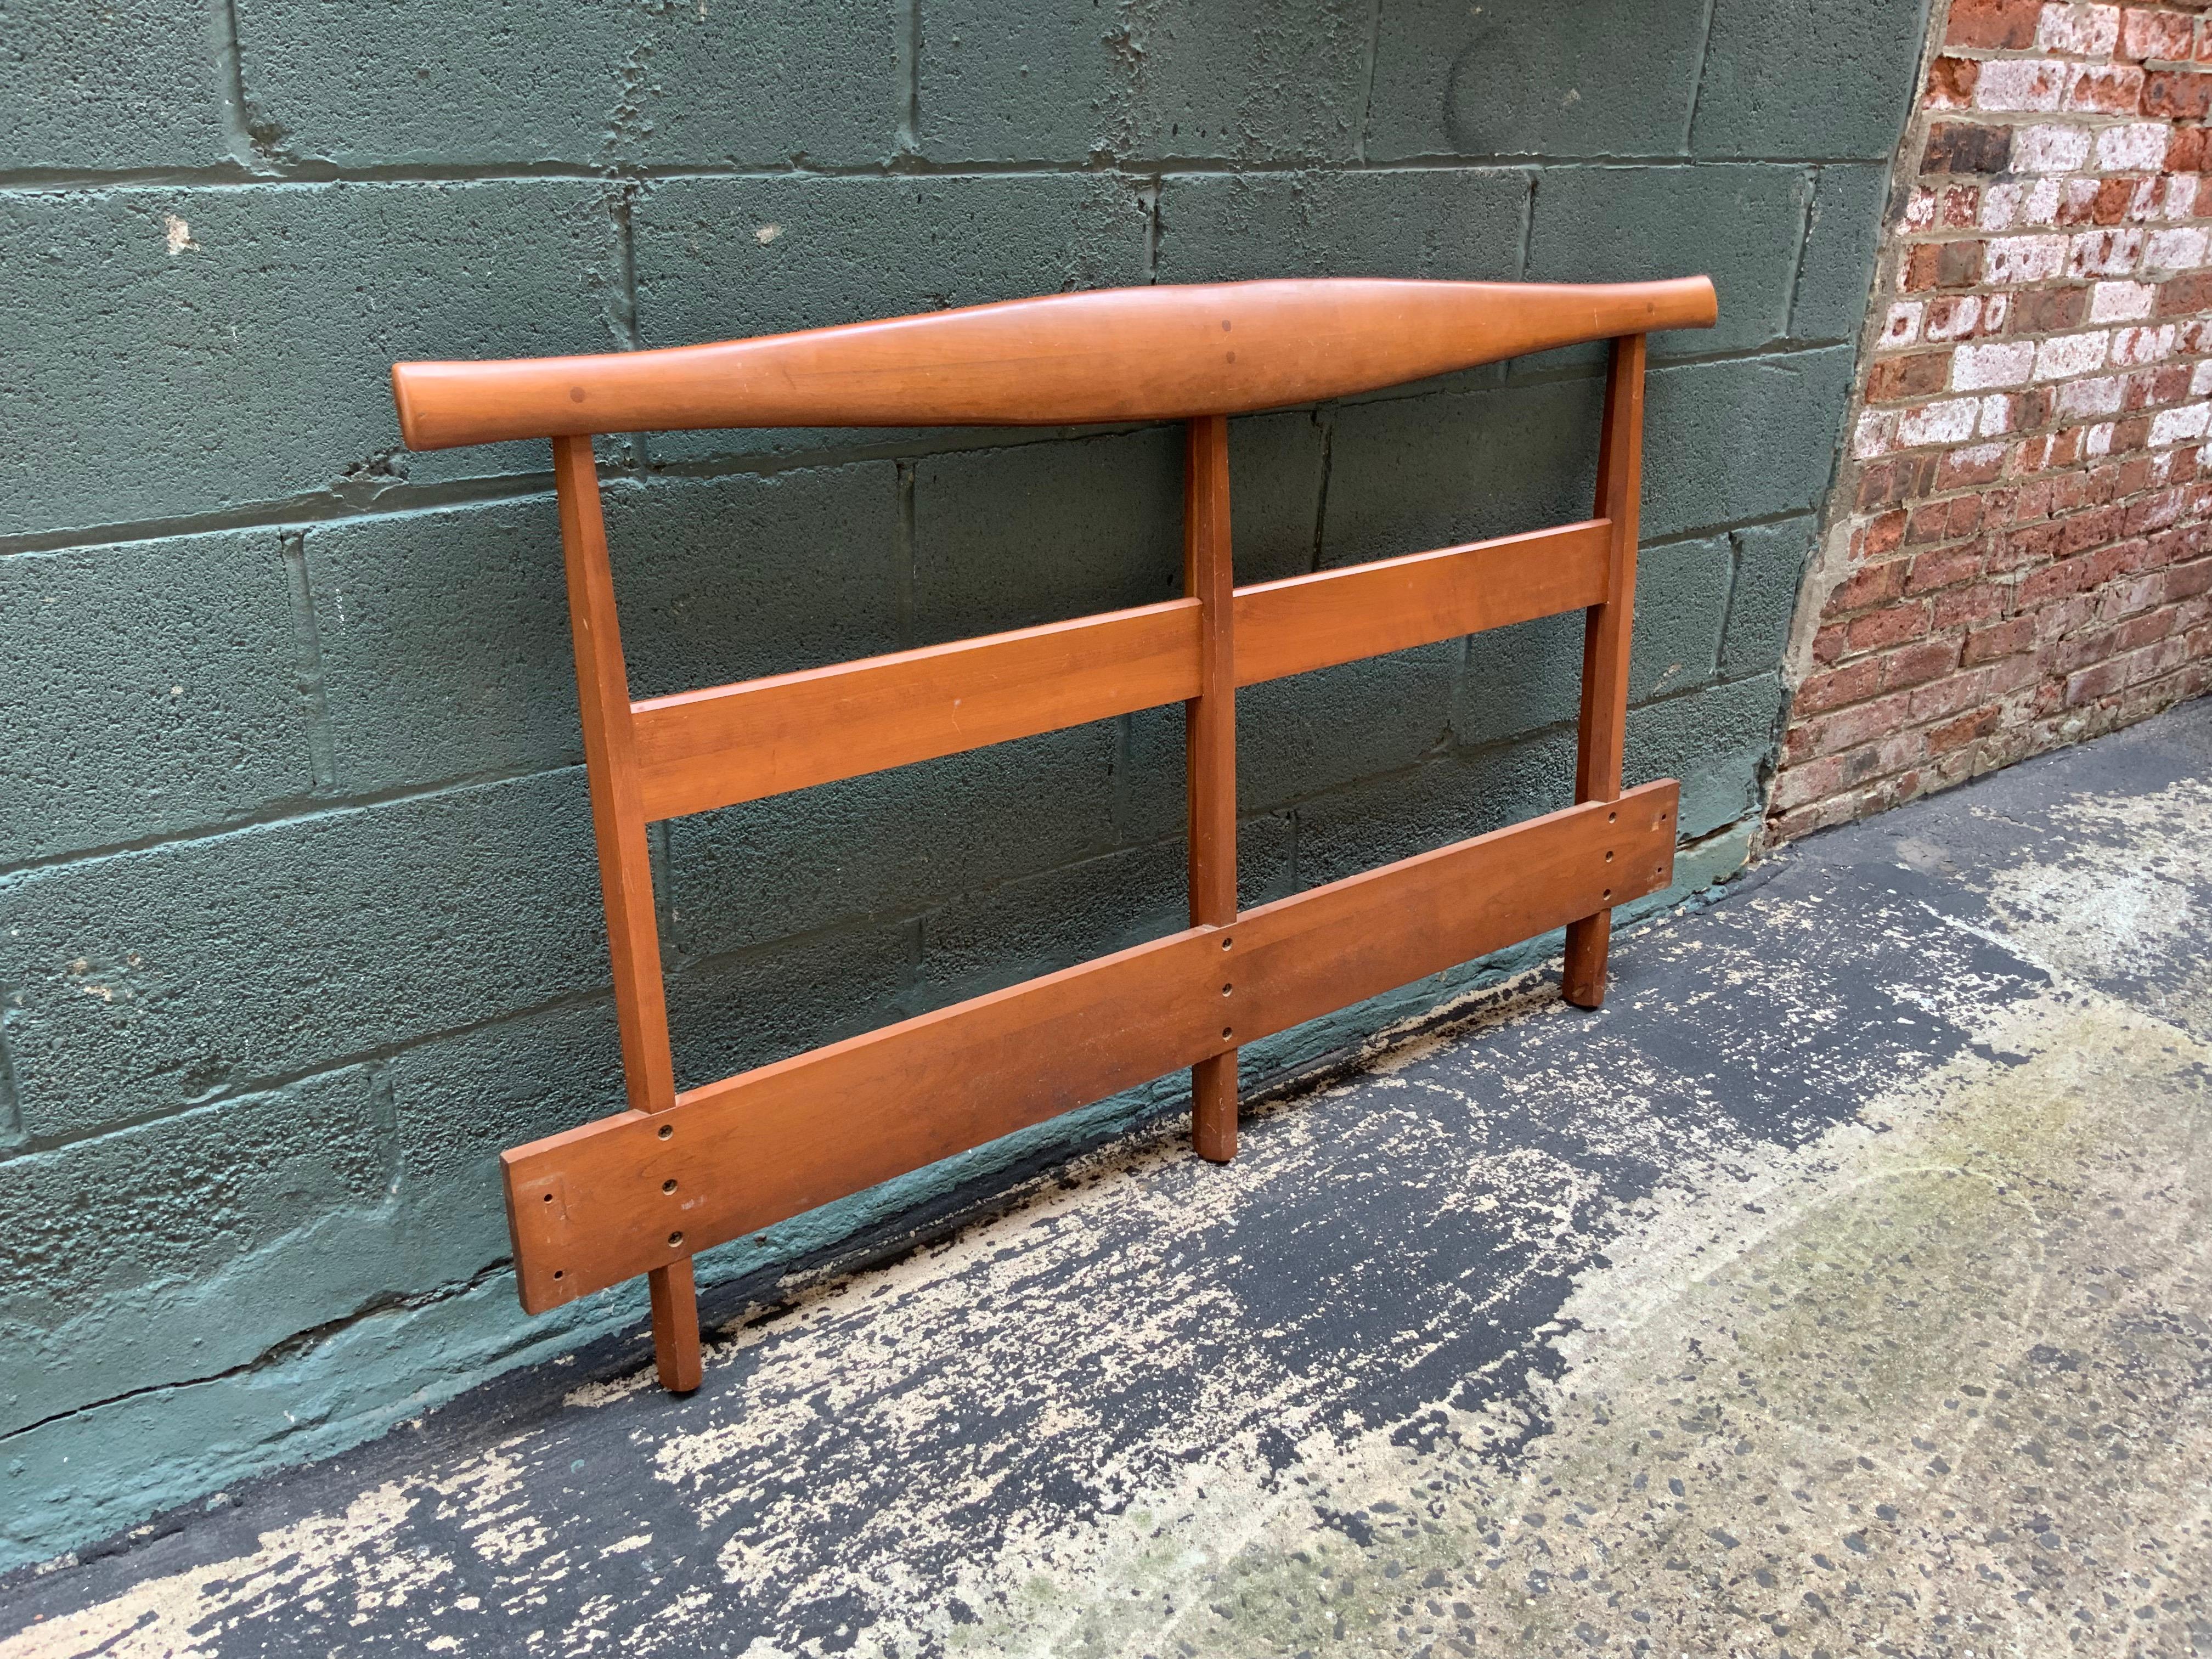 Solid cherry headboard for American Design Foundation for Directional designed by Kipp Stewart and Stewart MacDougal, circa 1959. Very good original finish.

Measures: 54